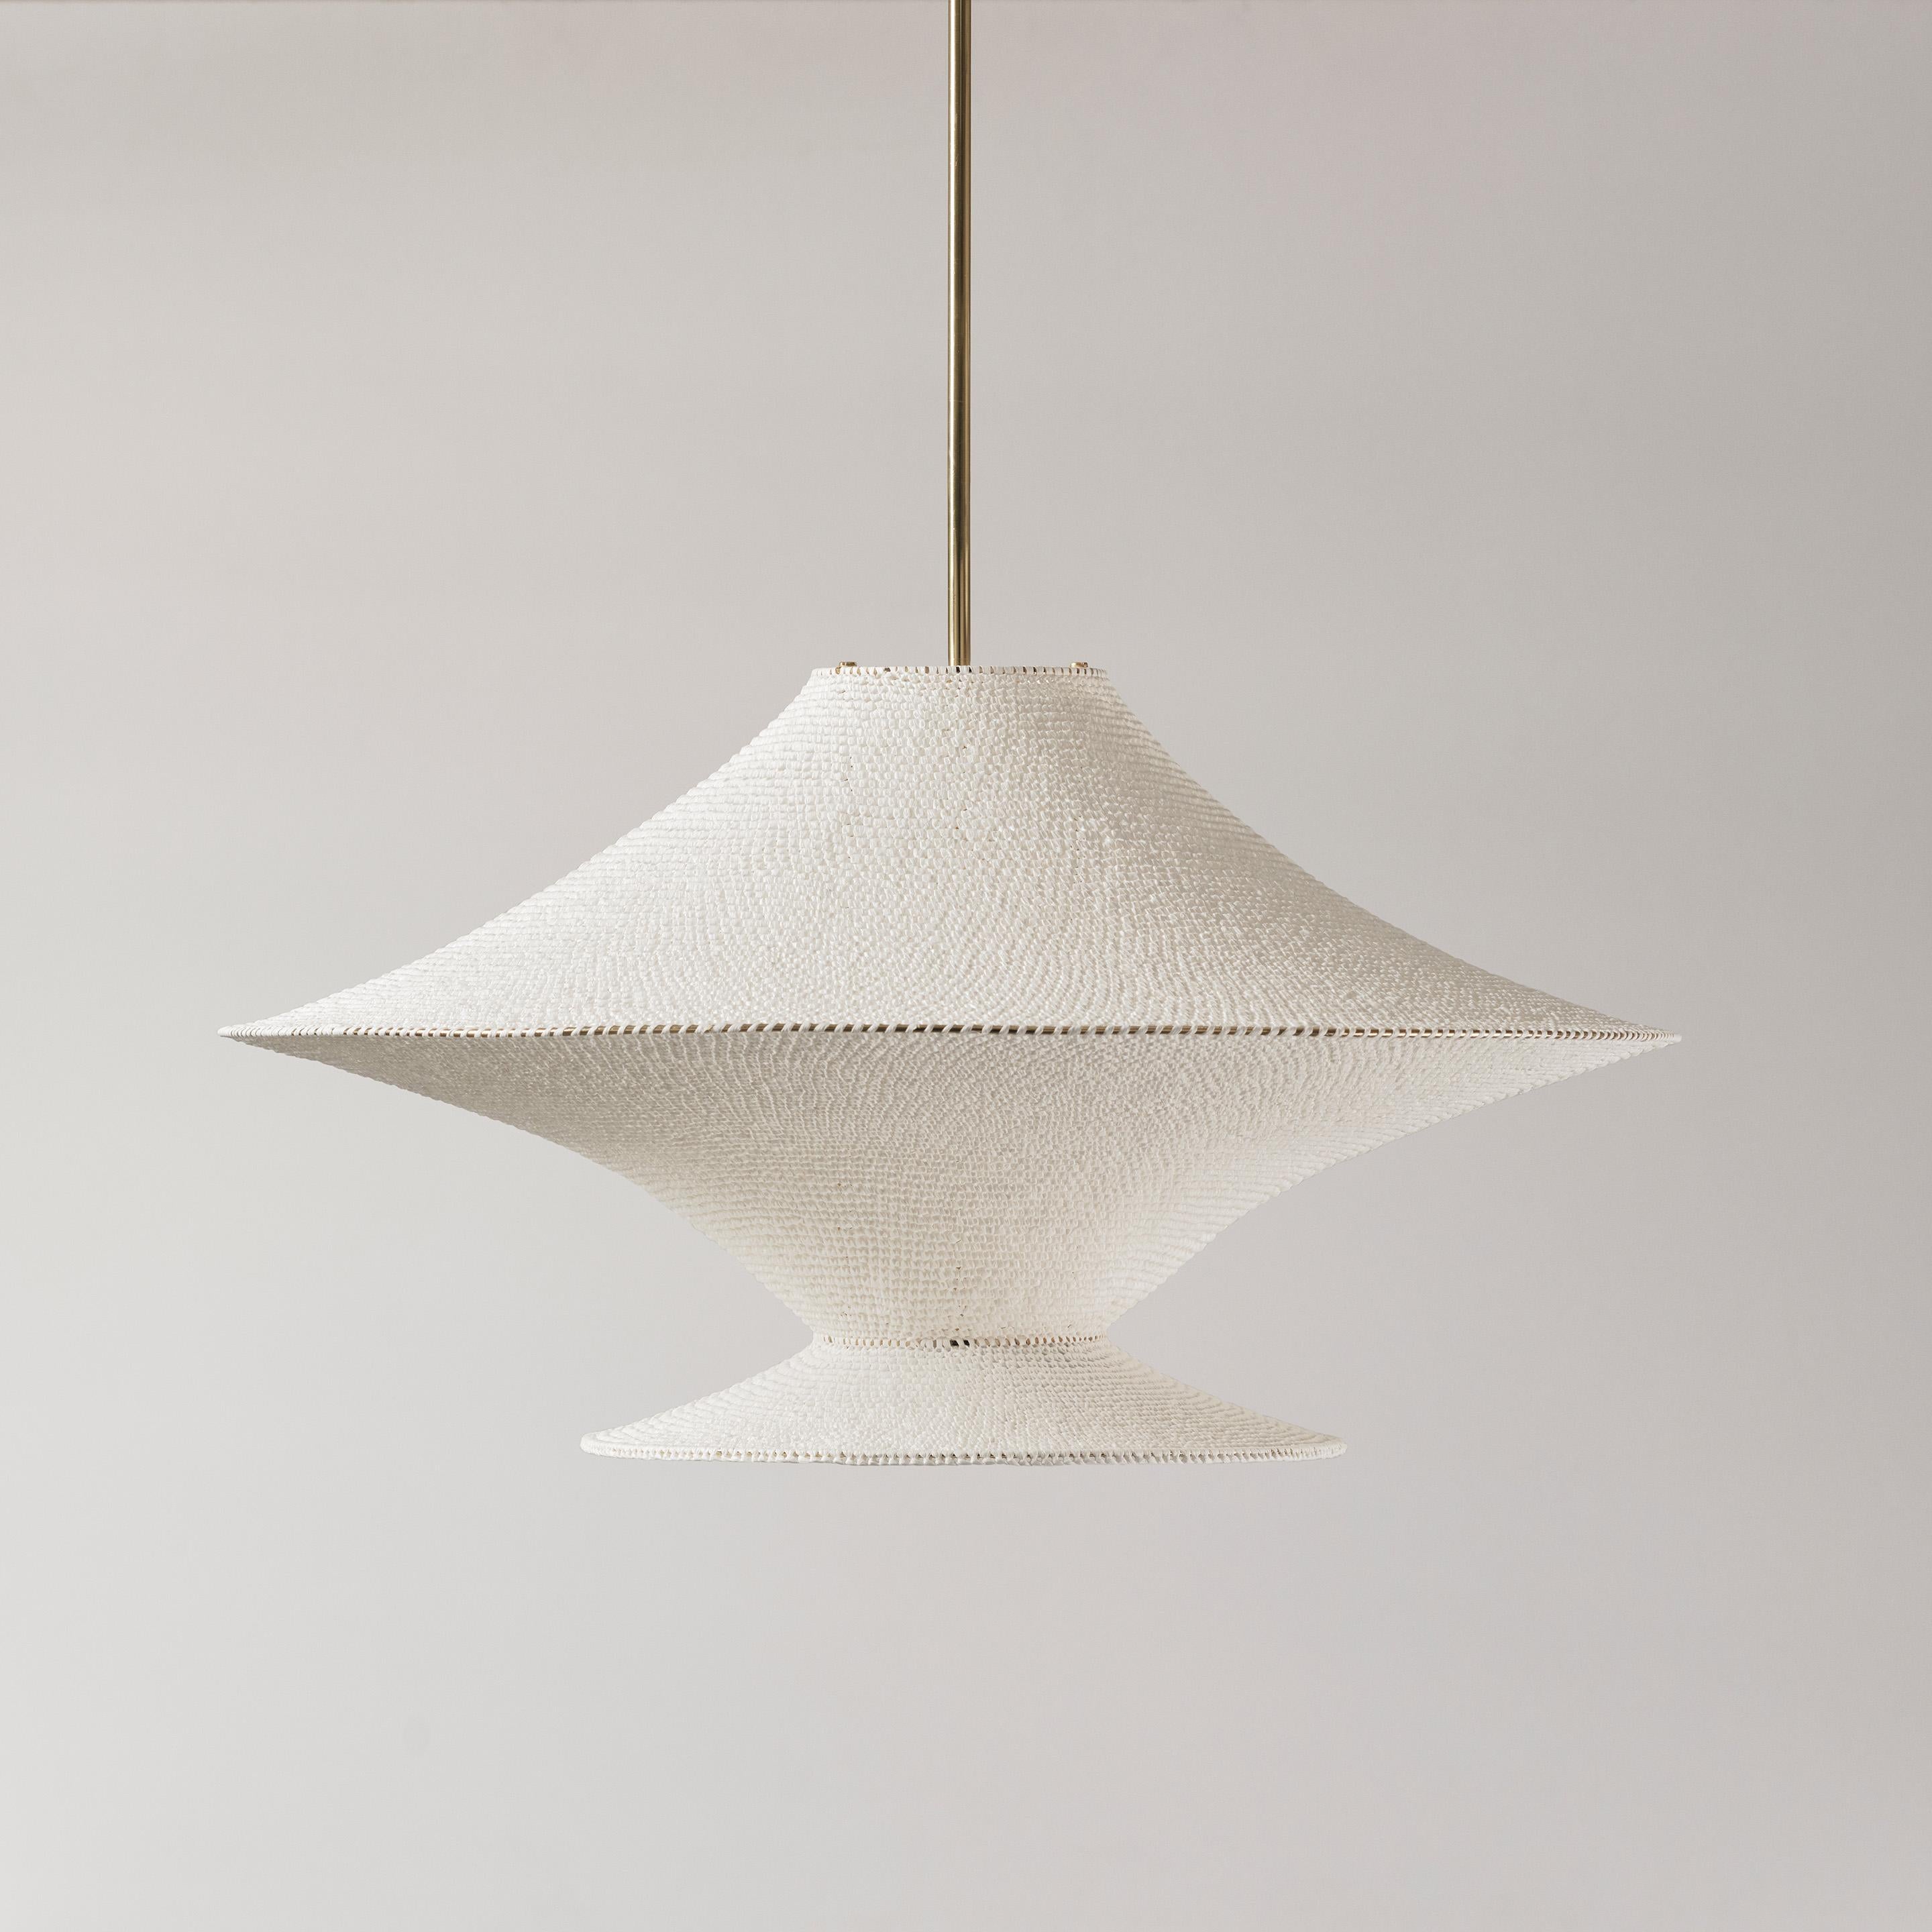 British JUPE Pendant Light Ø100cm/39.4in, Hand Crocheted in 100% Egyptian Cotton For Sale